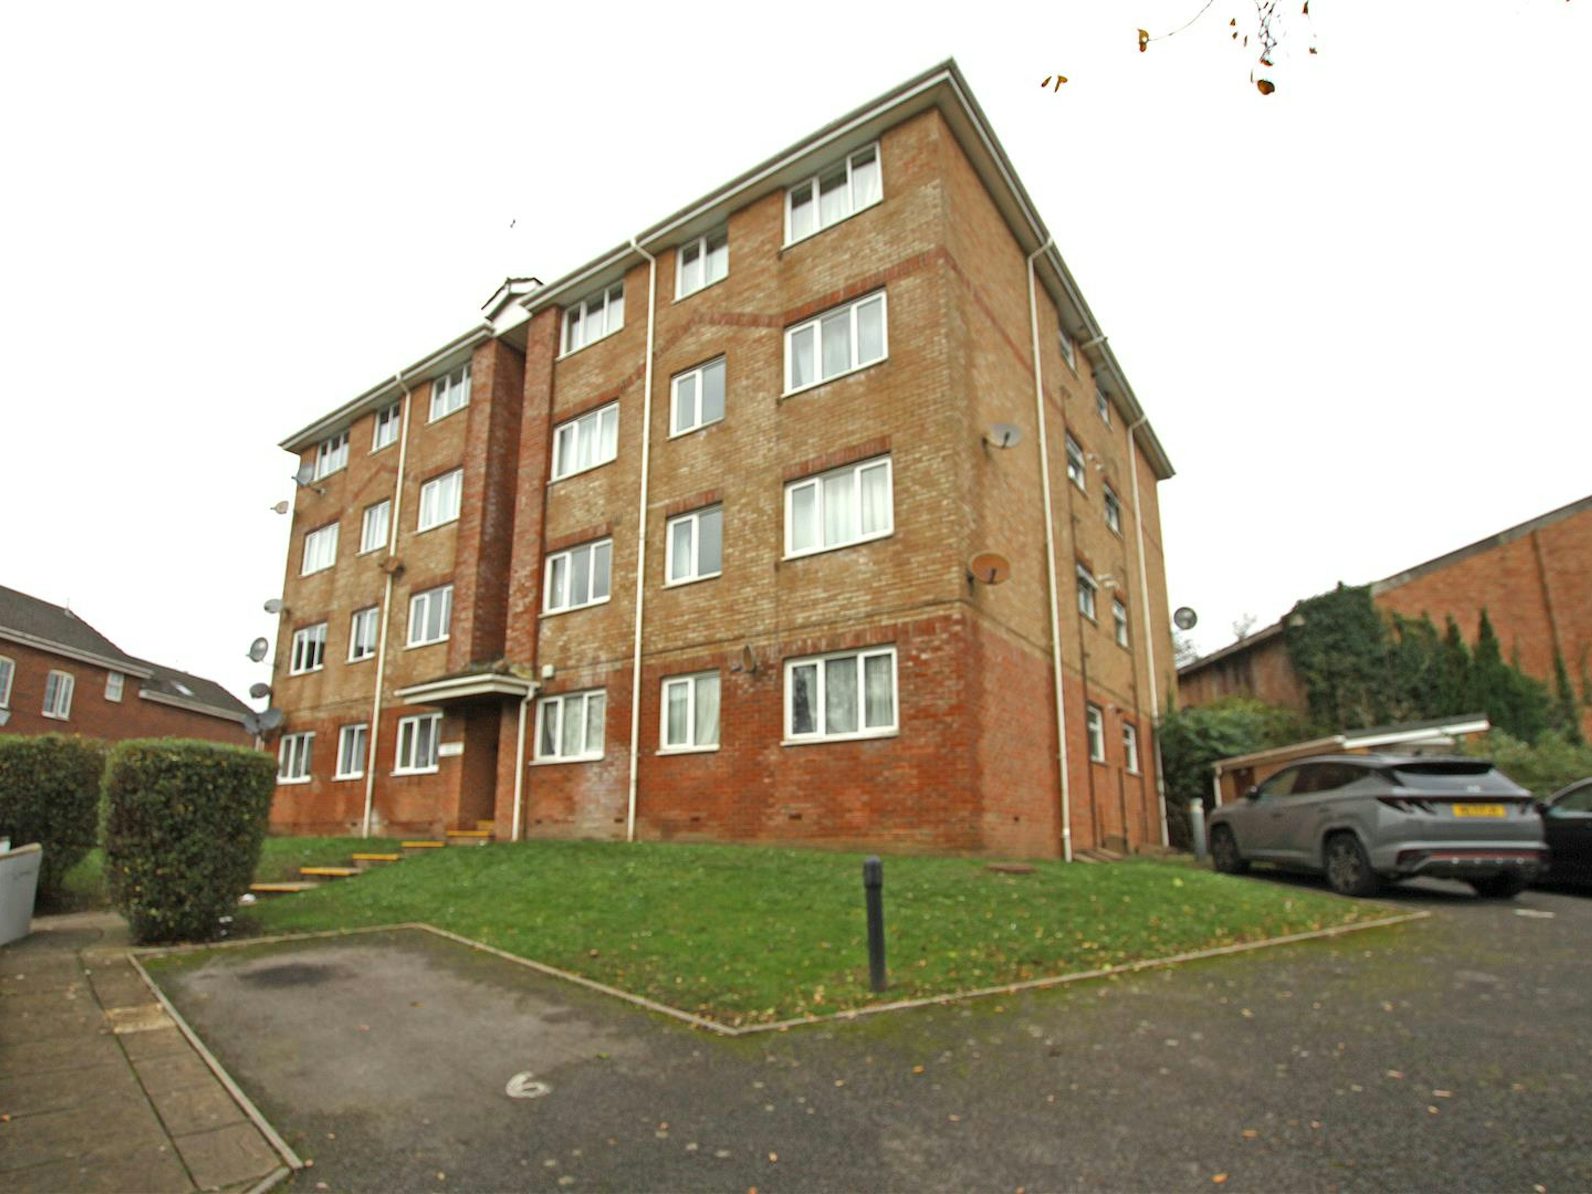 Flat for sale on Northcote Road Bournemouth, BH1